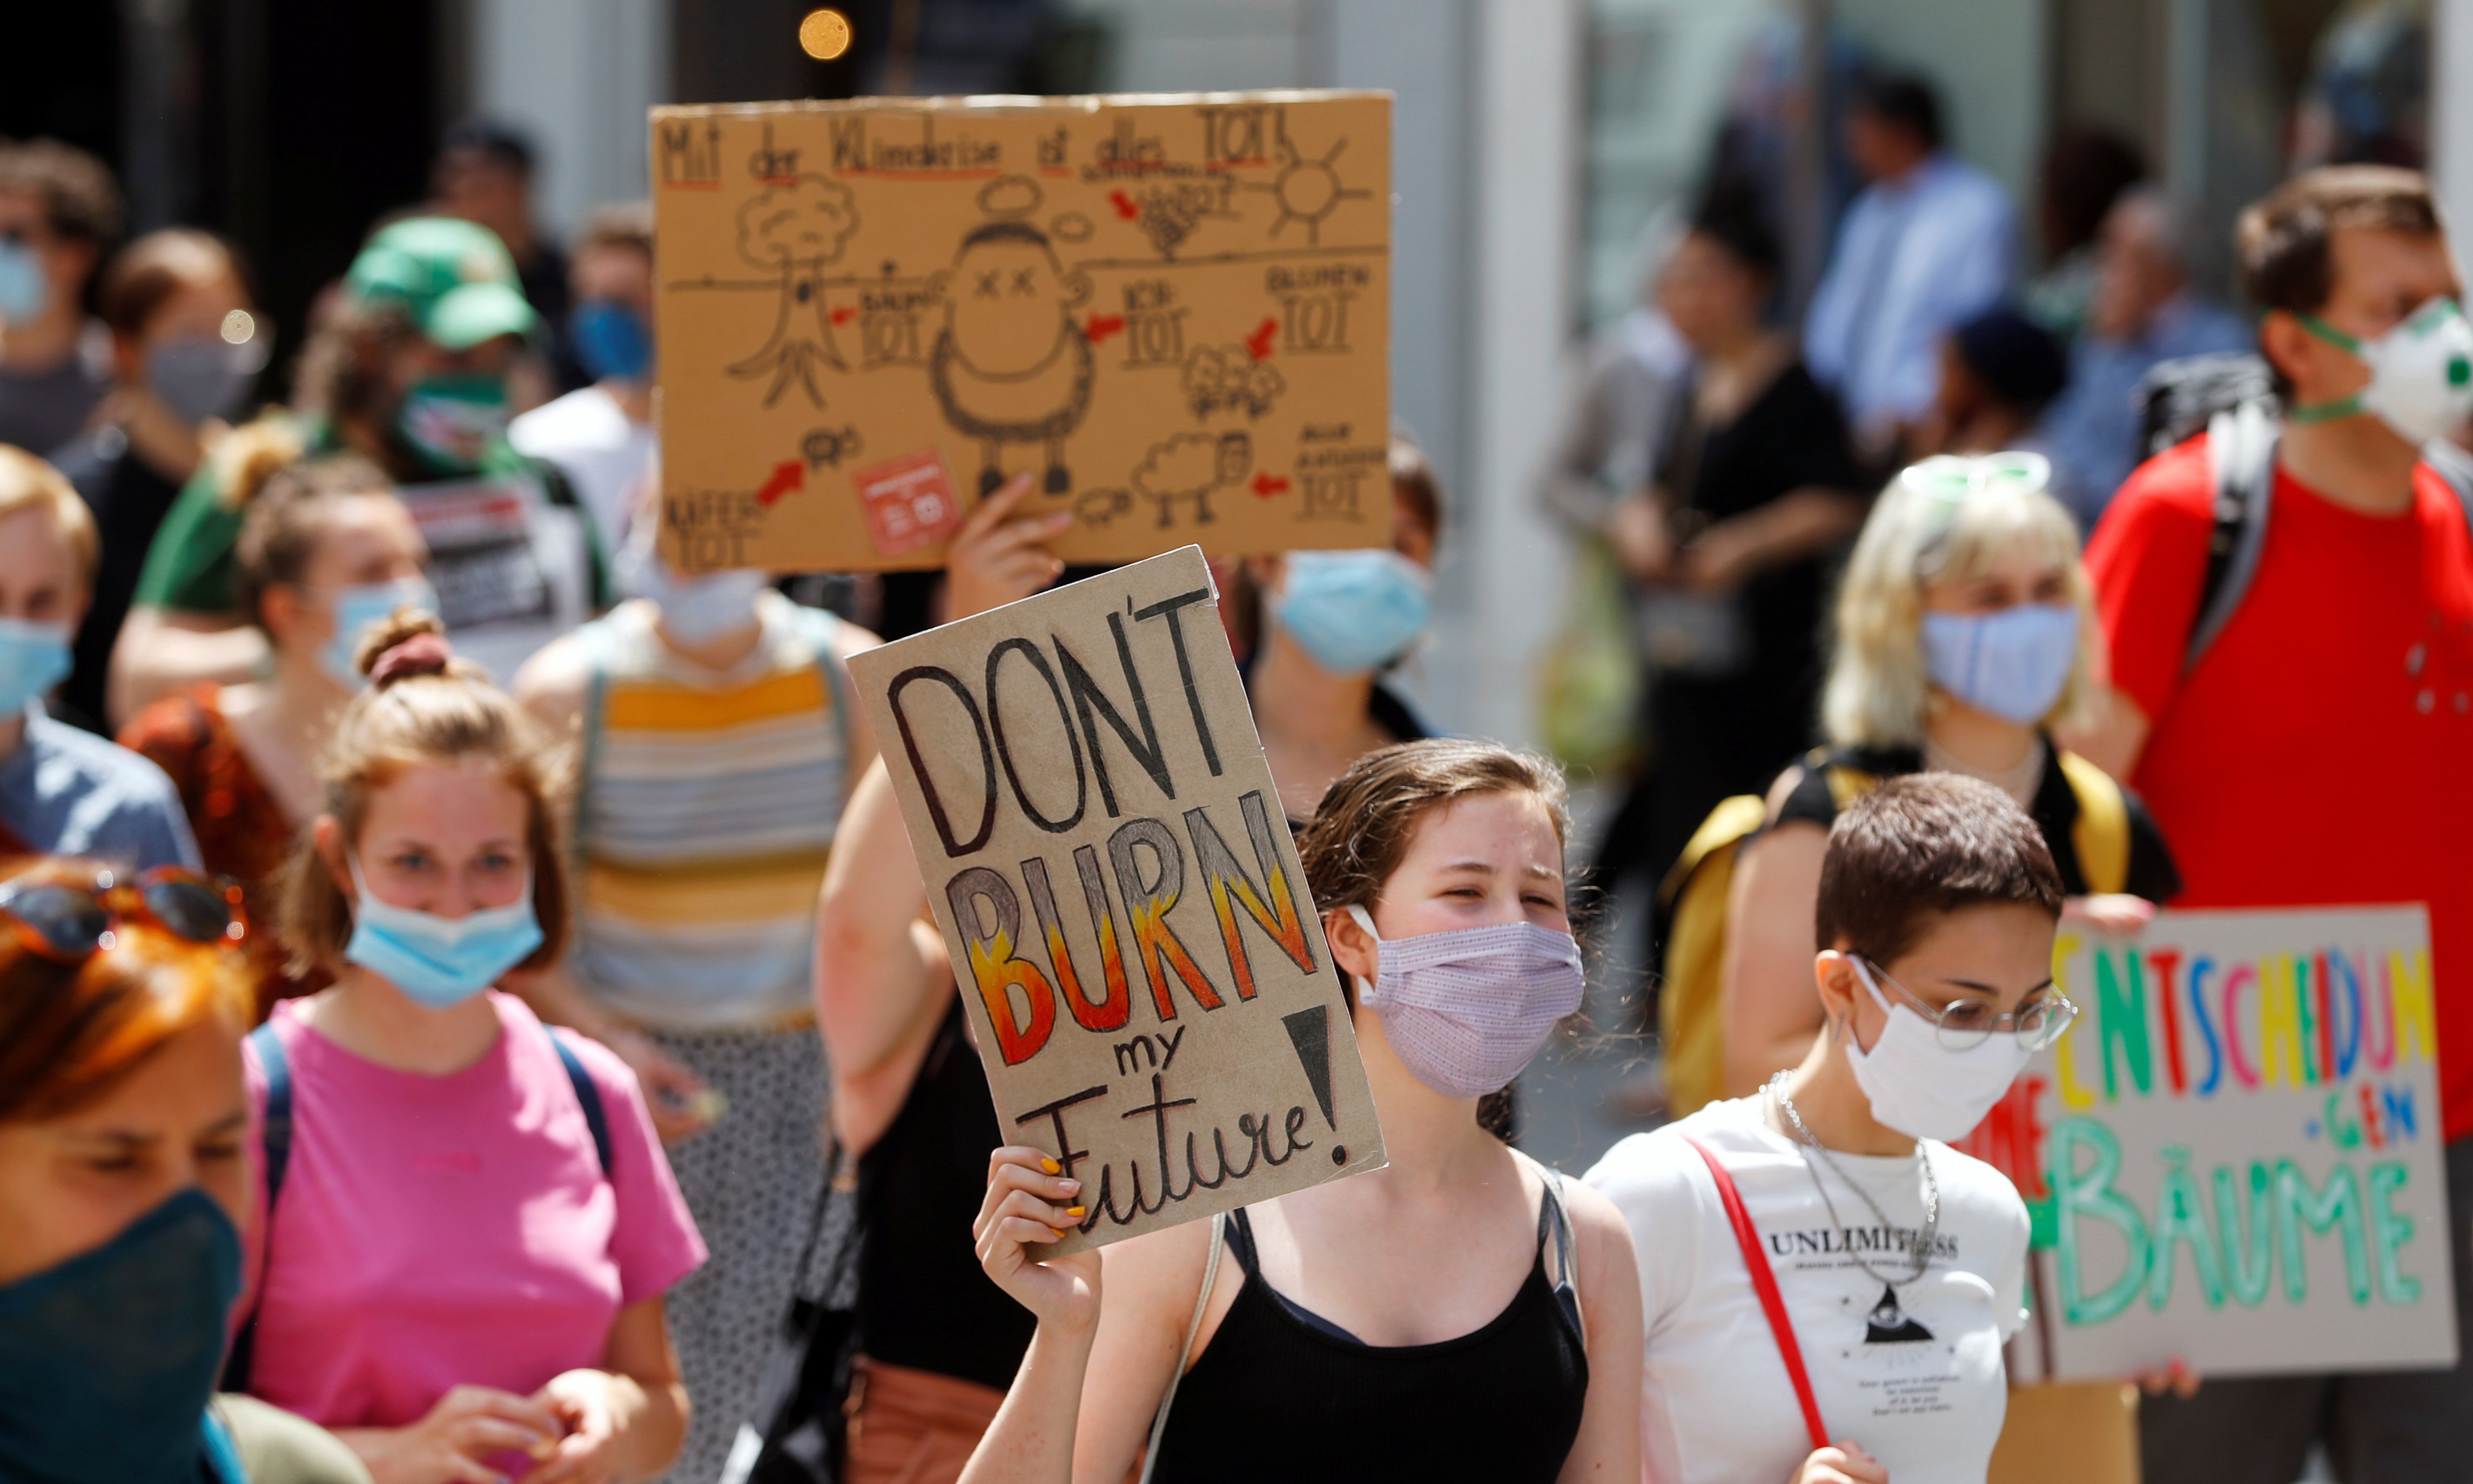 Climate change protester carries a sign that says 'Don't burn my future'